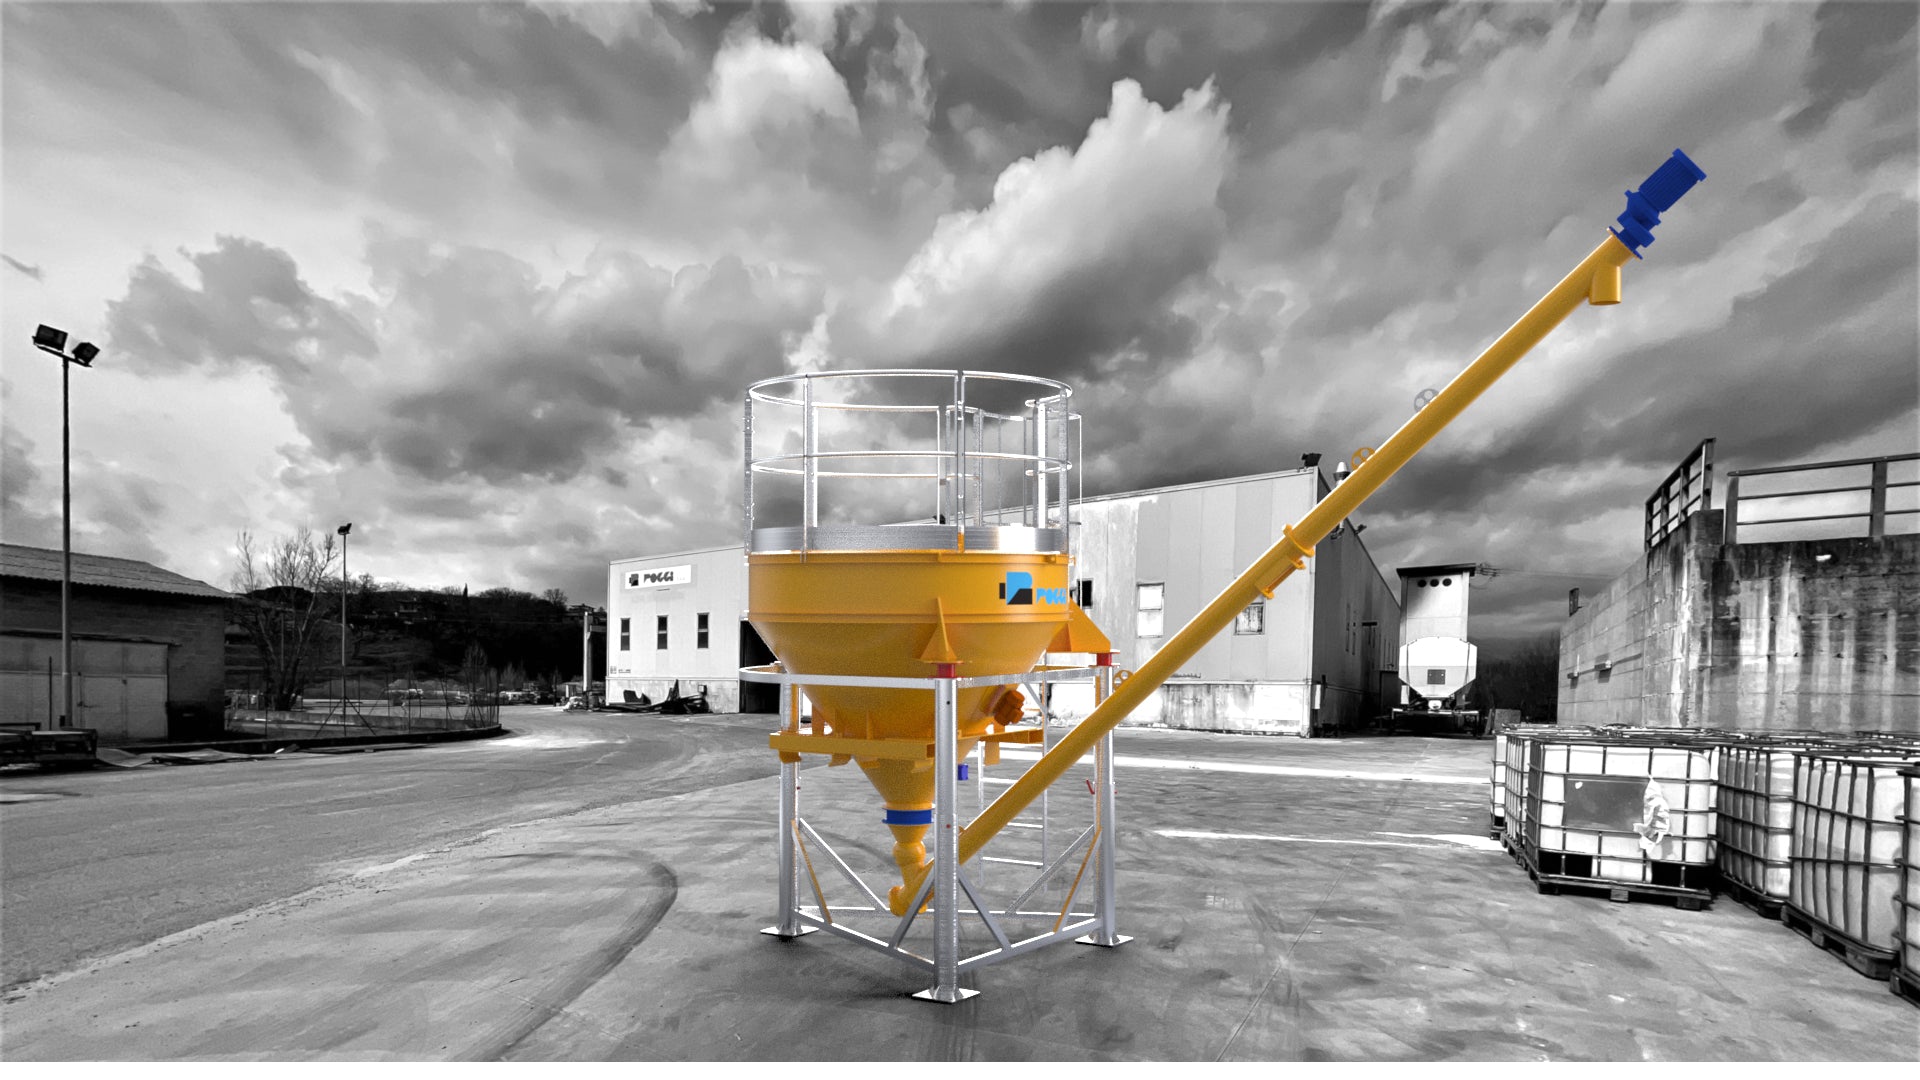 Big Bag Silos are equipped with telescopic legs that allow easy transport